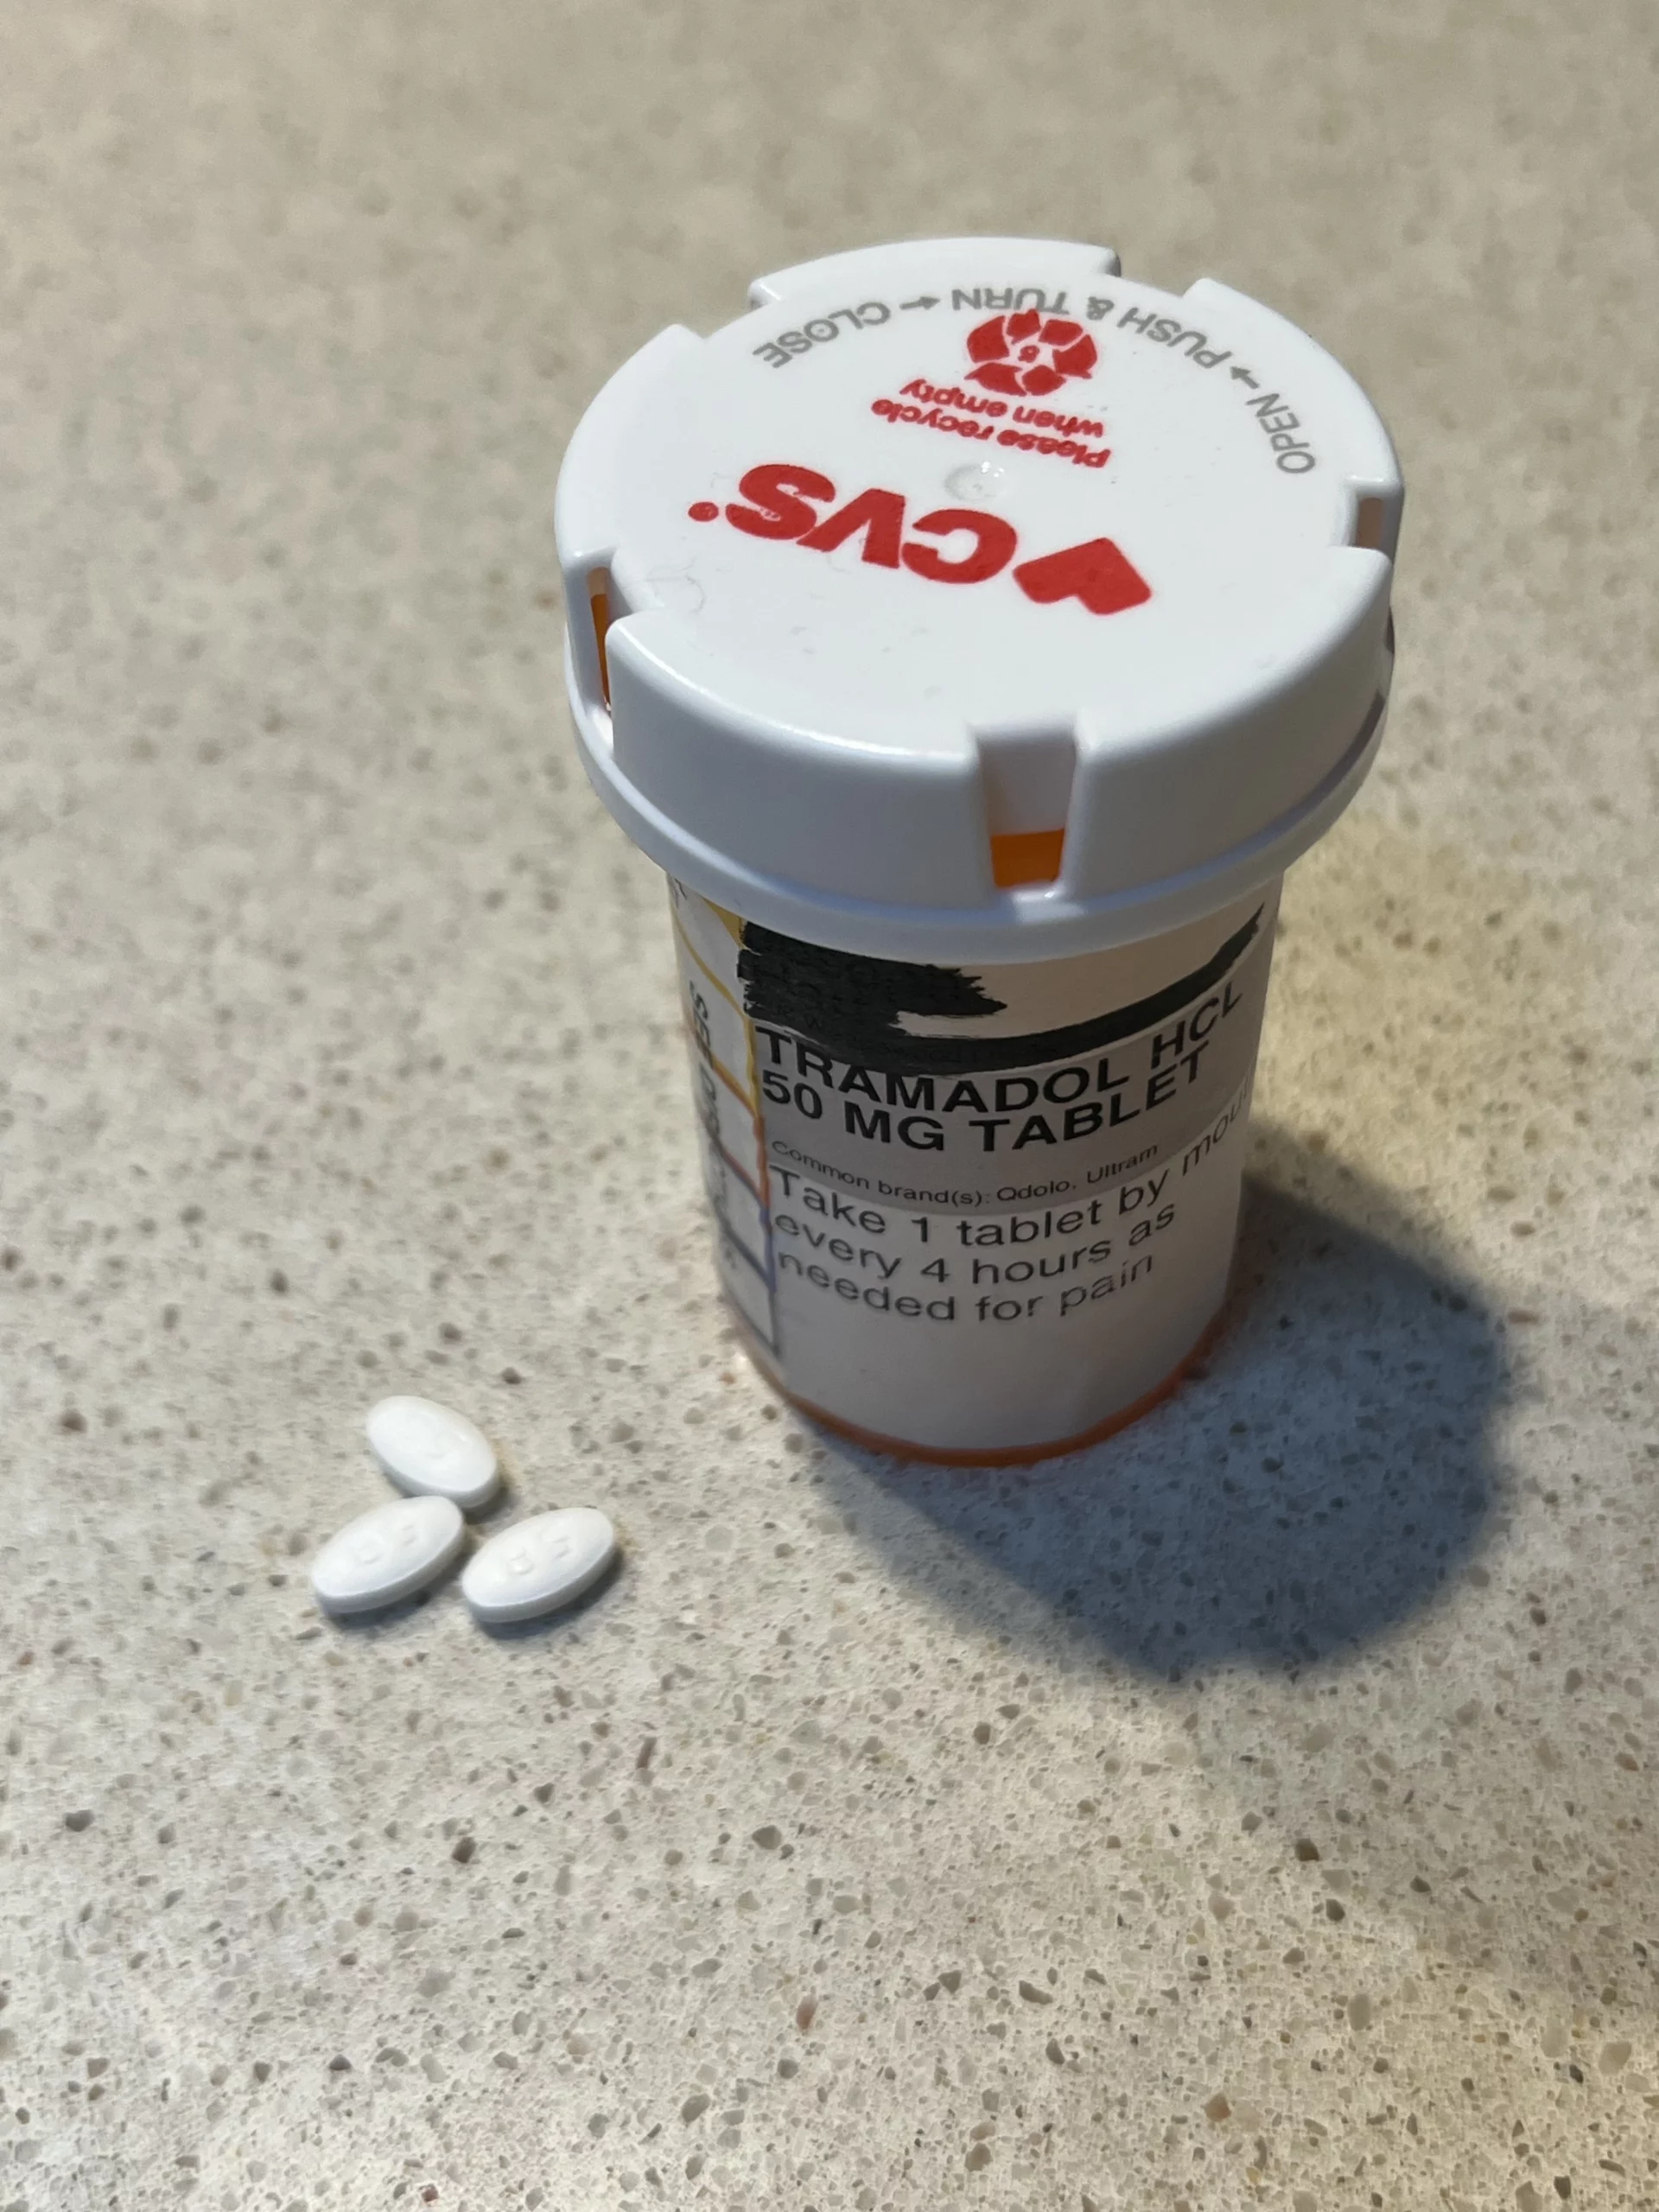 tramadol pill bottle with 3 pills on counter next to bottle